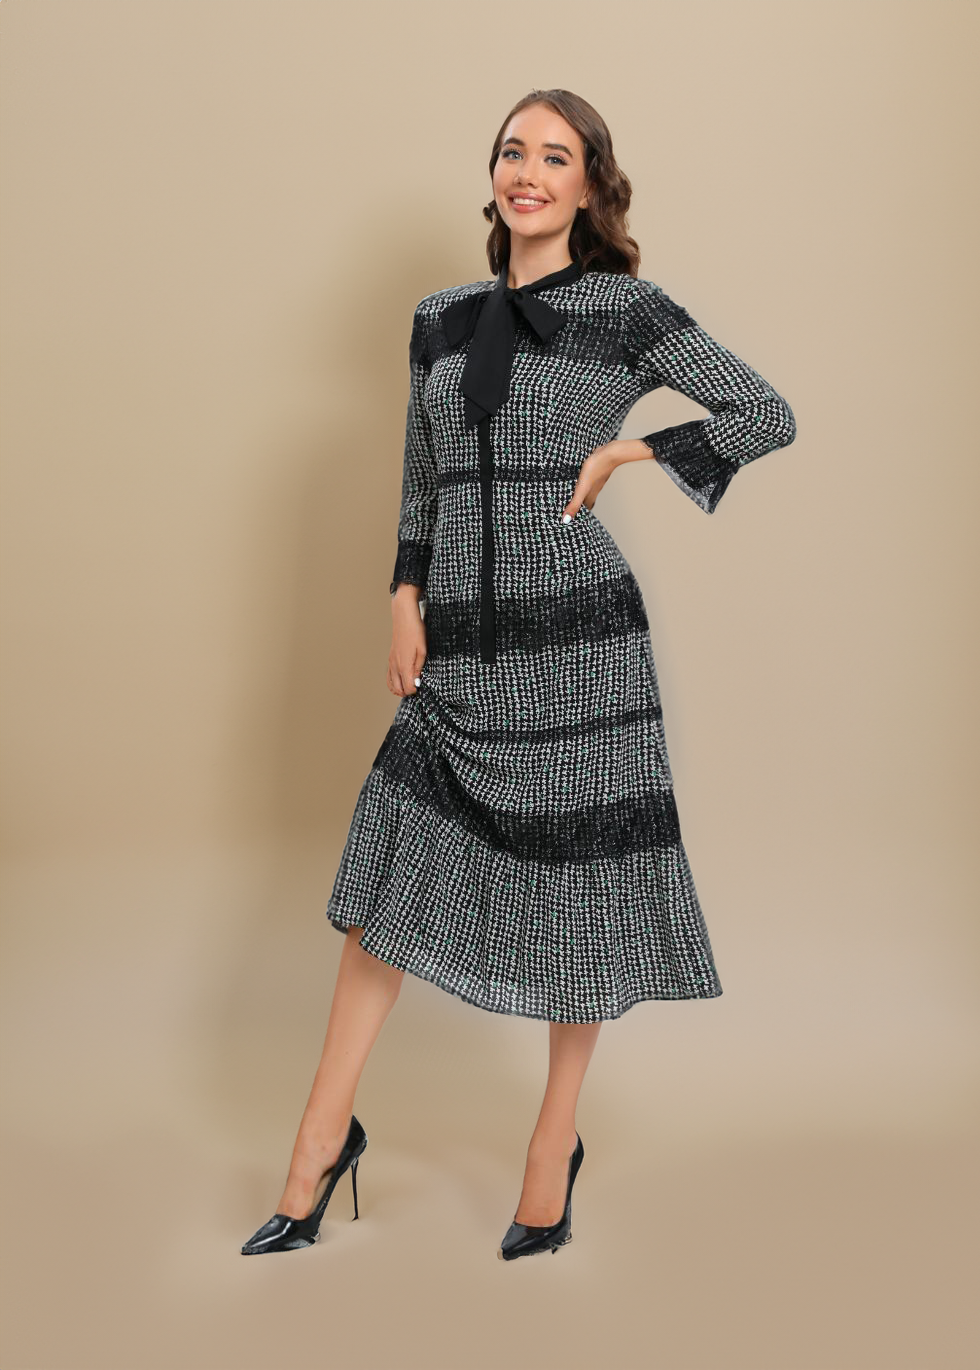 Classic Tweed Shift Dress with Bow Collar Detail